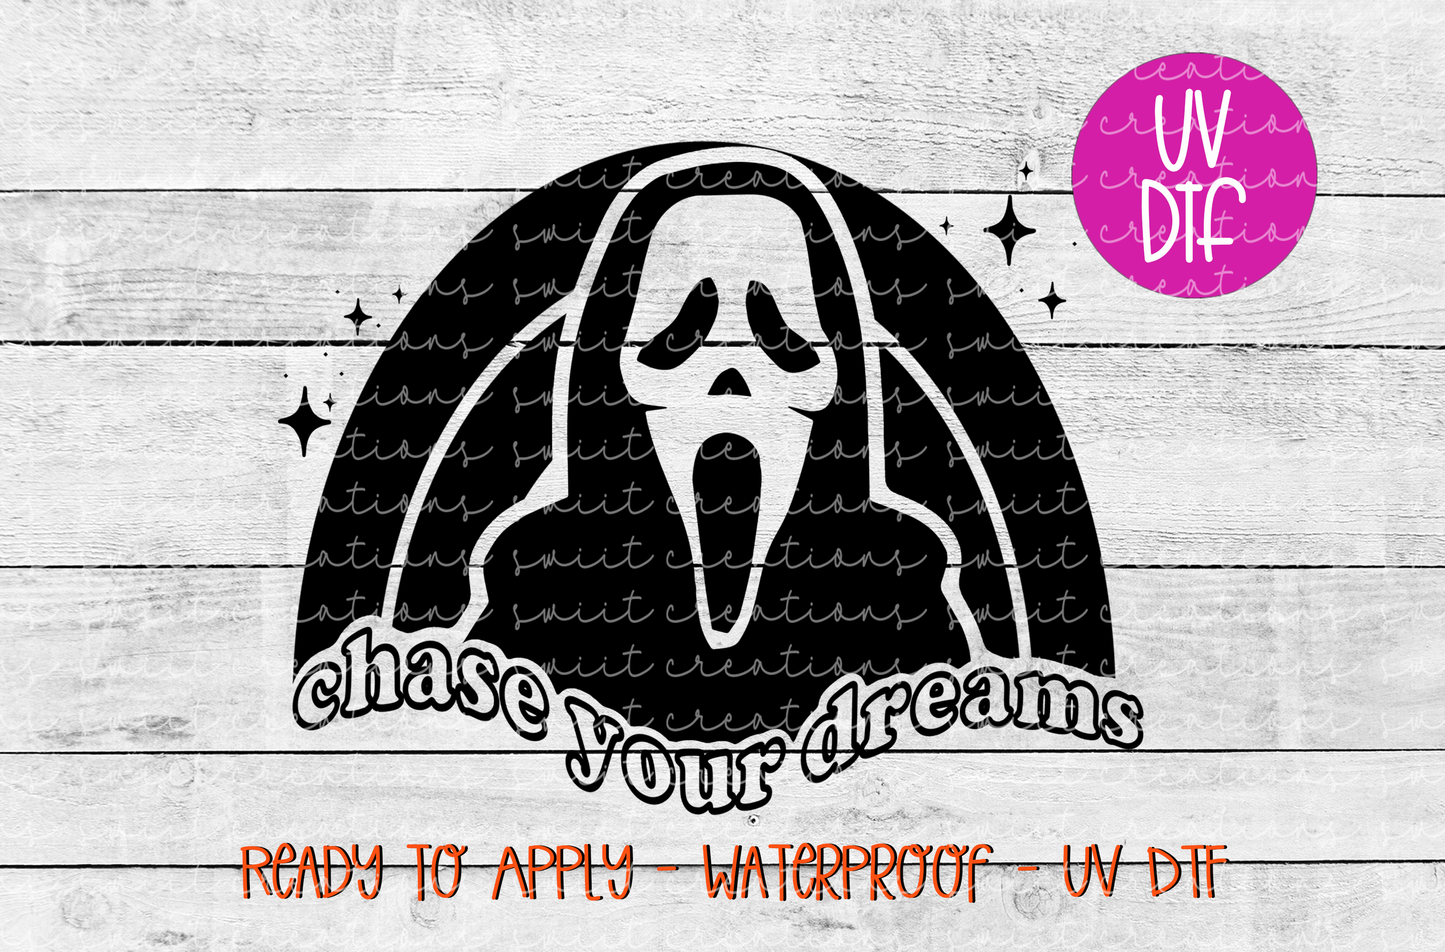 Chase your Dreams UV DTF - UV715 (4x3.2)